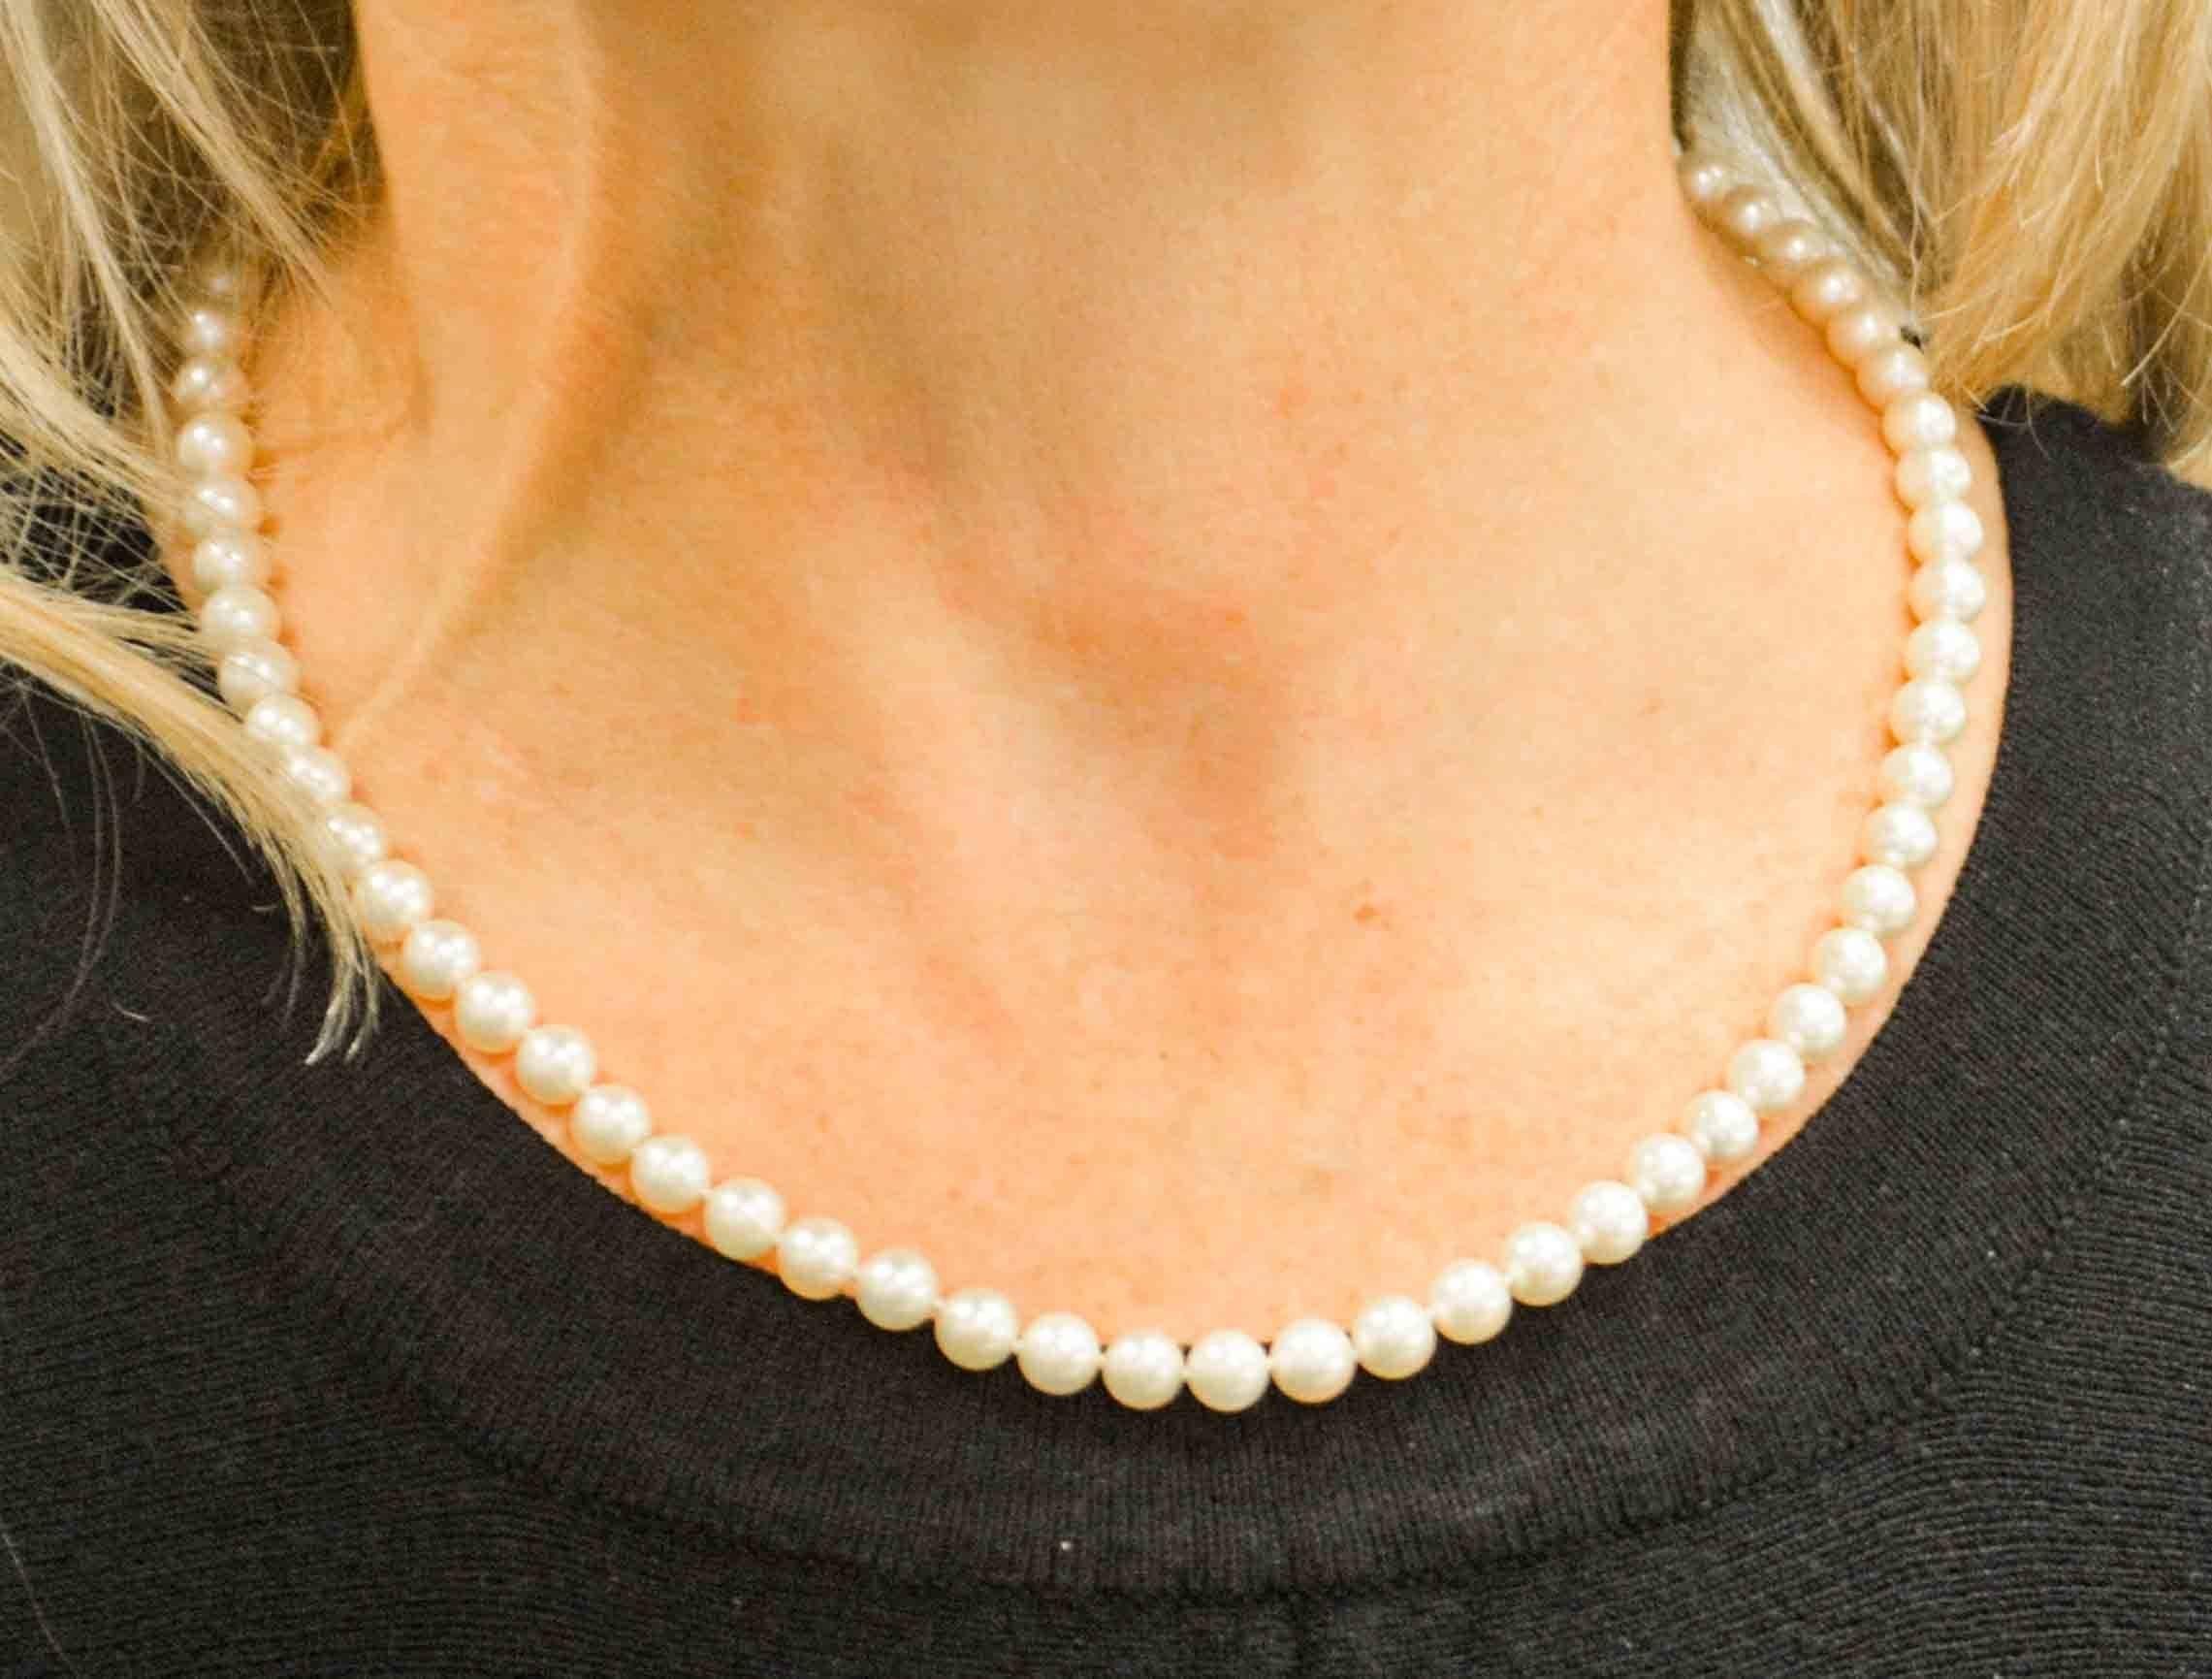 Women's Cream Cultured Pearls Necklace